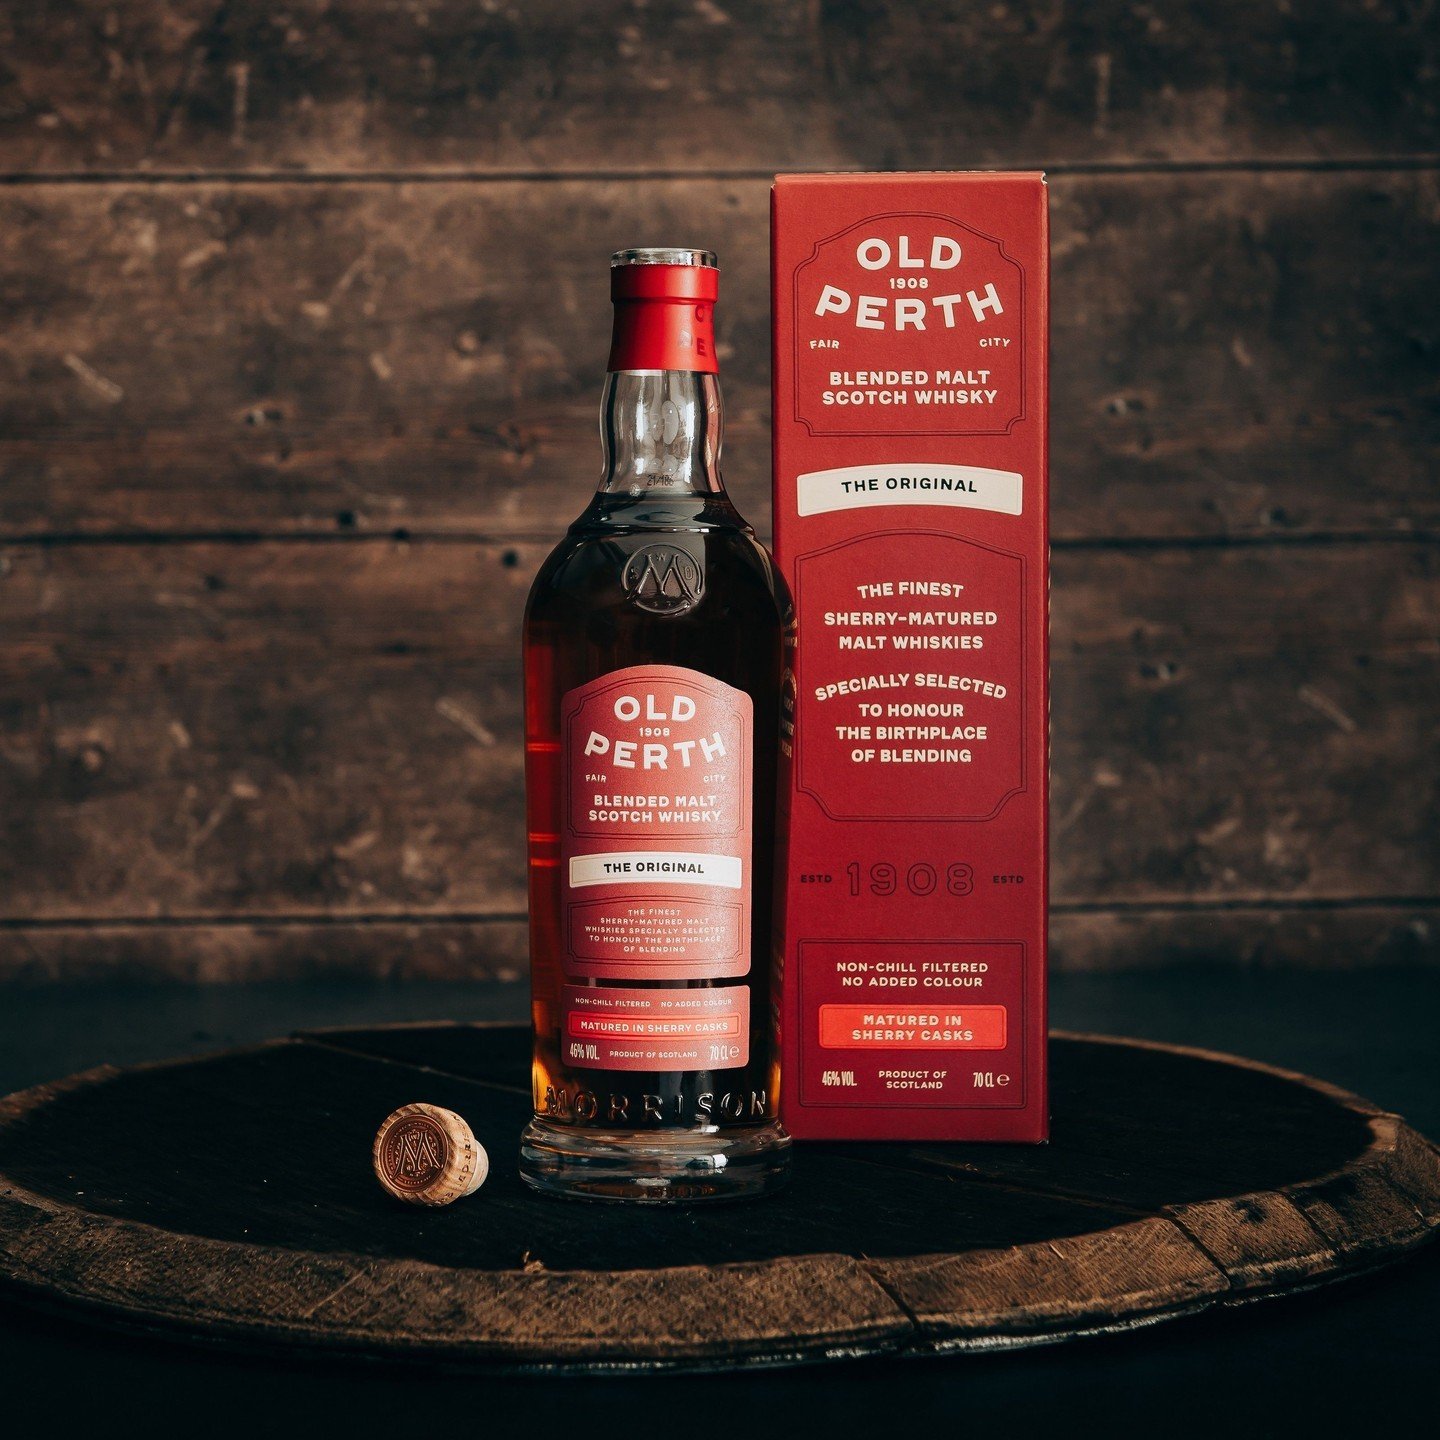 Nestled just a stone's throw away from the blending capital of the world which is now the forgotten whisky city, we proudly celebrate our rich whisky heritage. Producing an exceptional selection of sherry-matured whiskies, sourced from some of the mo